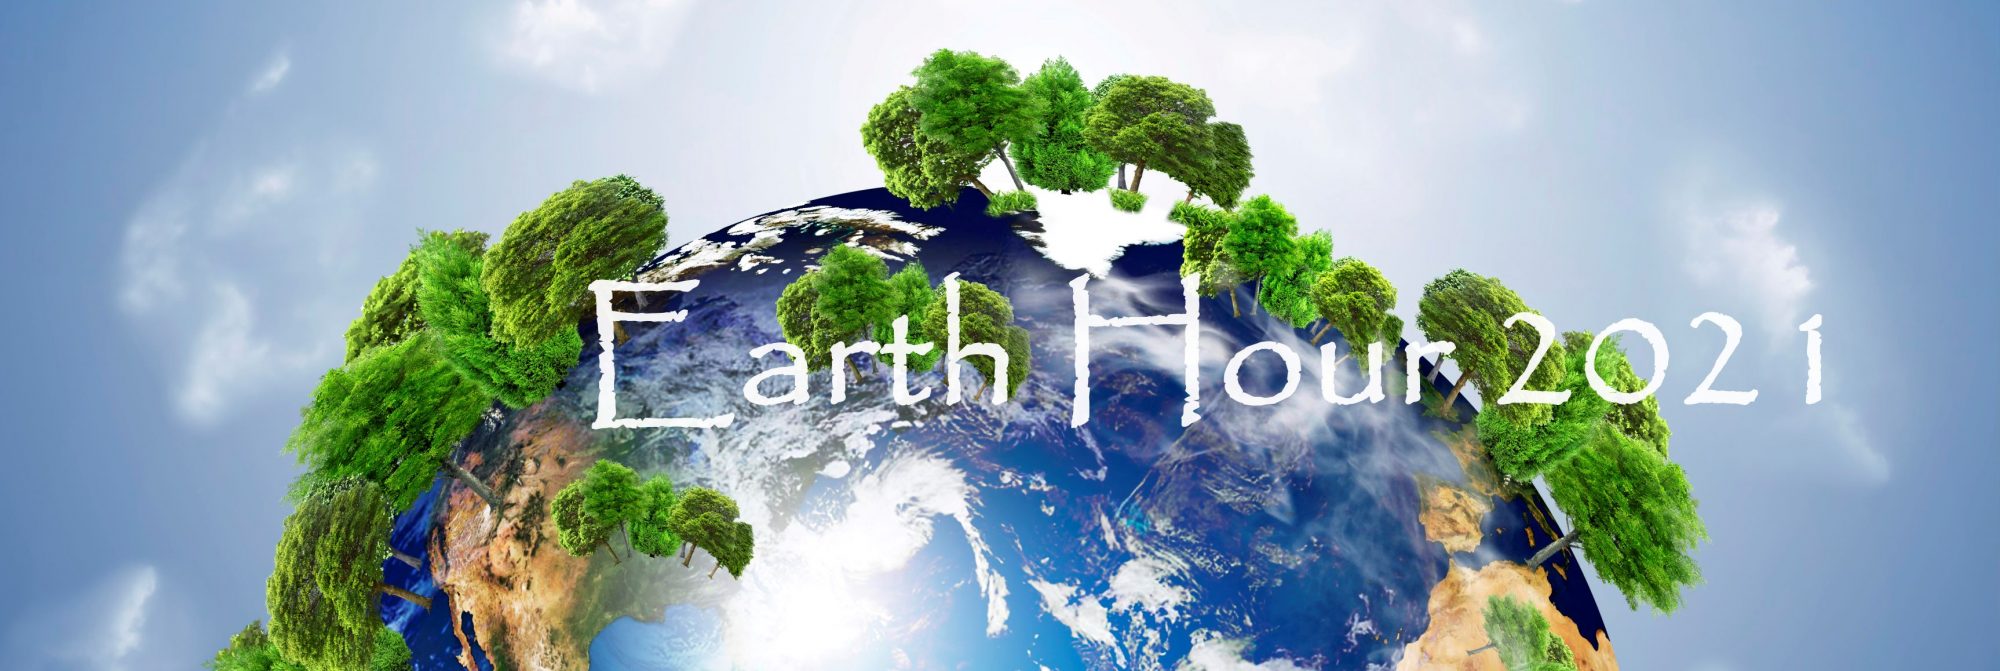 Earth hour banner